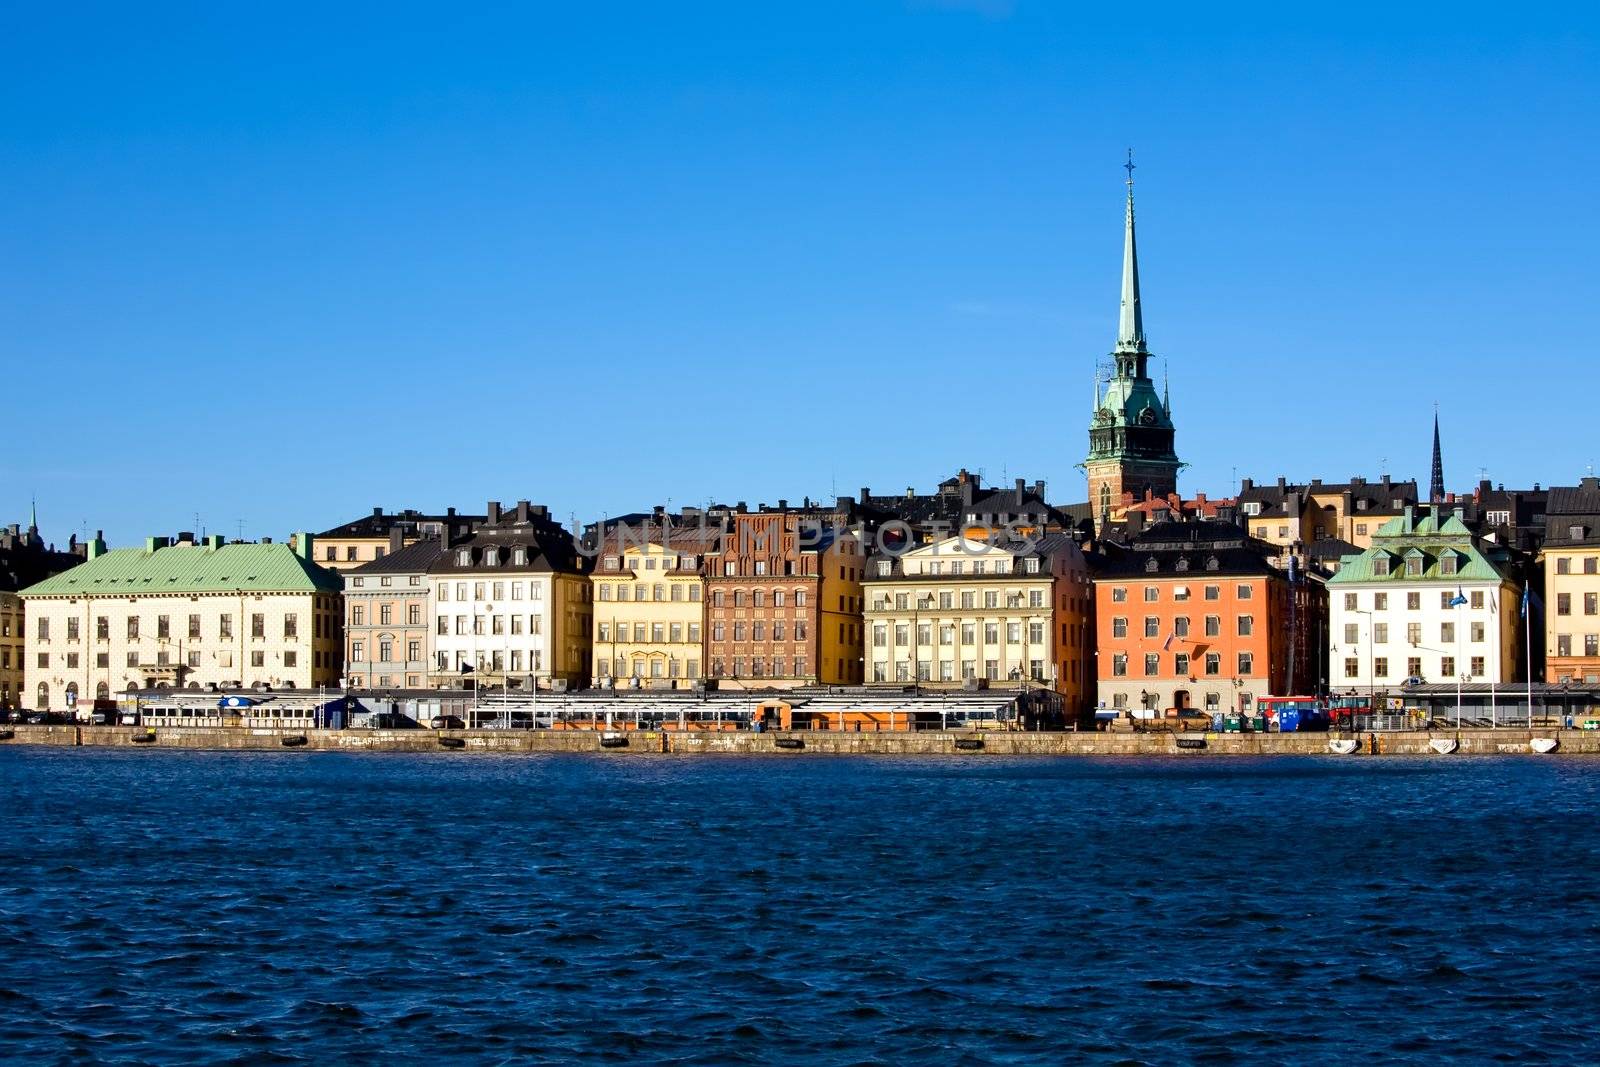 Classical view of winter Stockholm City